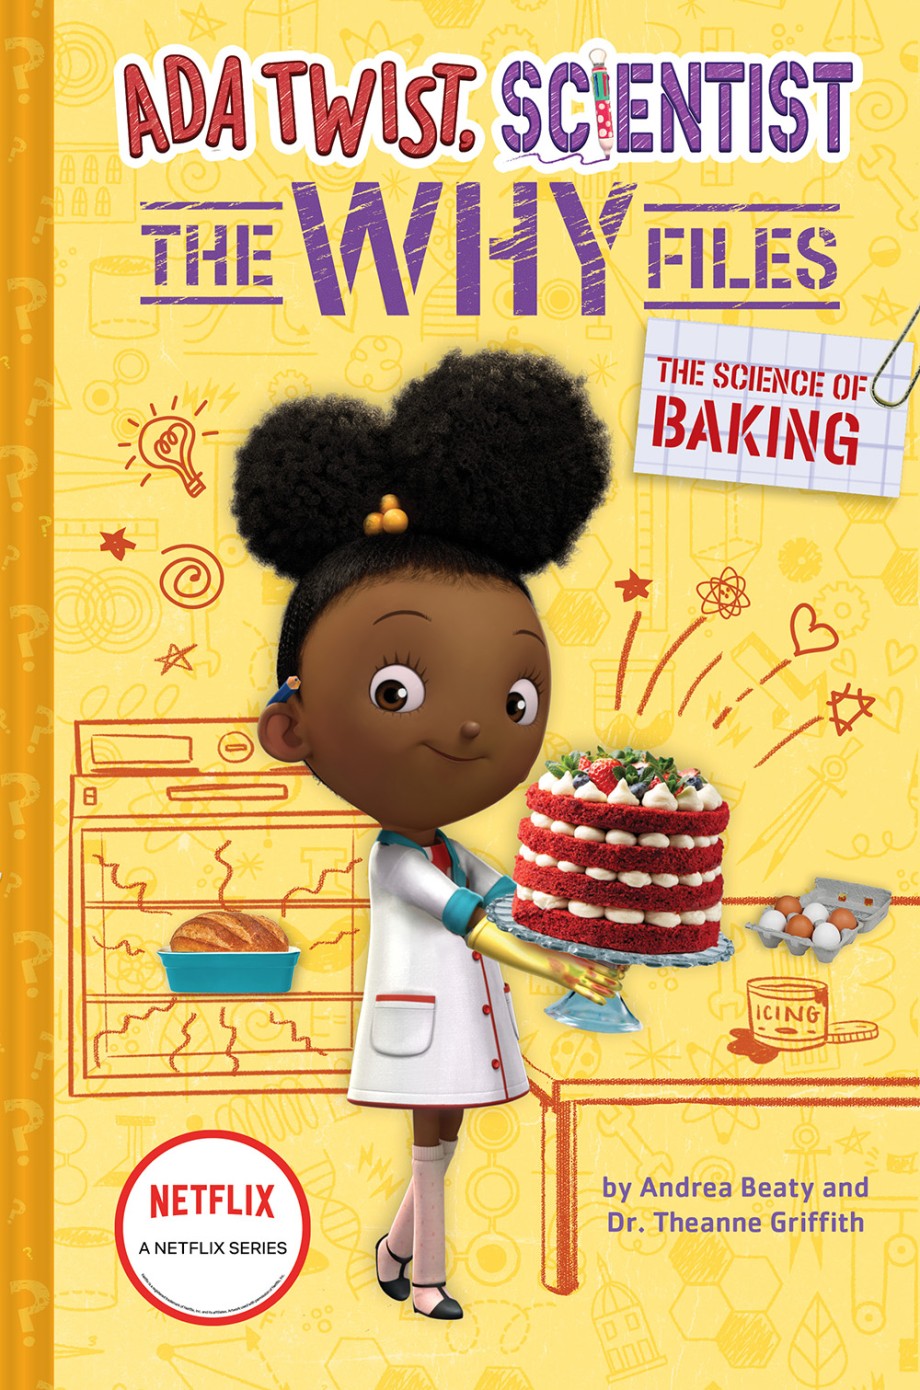 Science of Baking (Ada Twist, Scientist: The Why Files #3) 